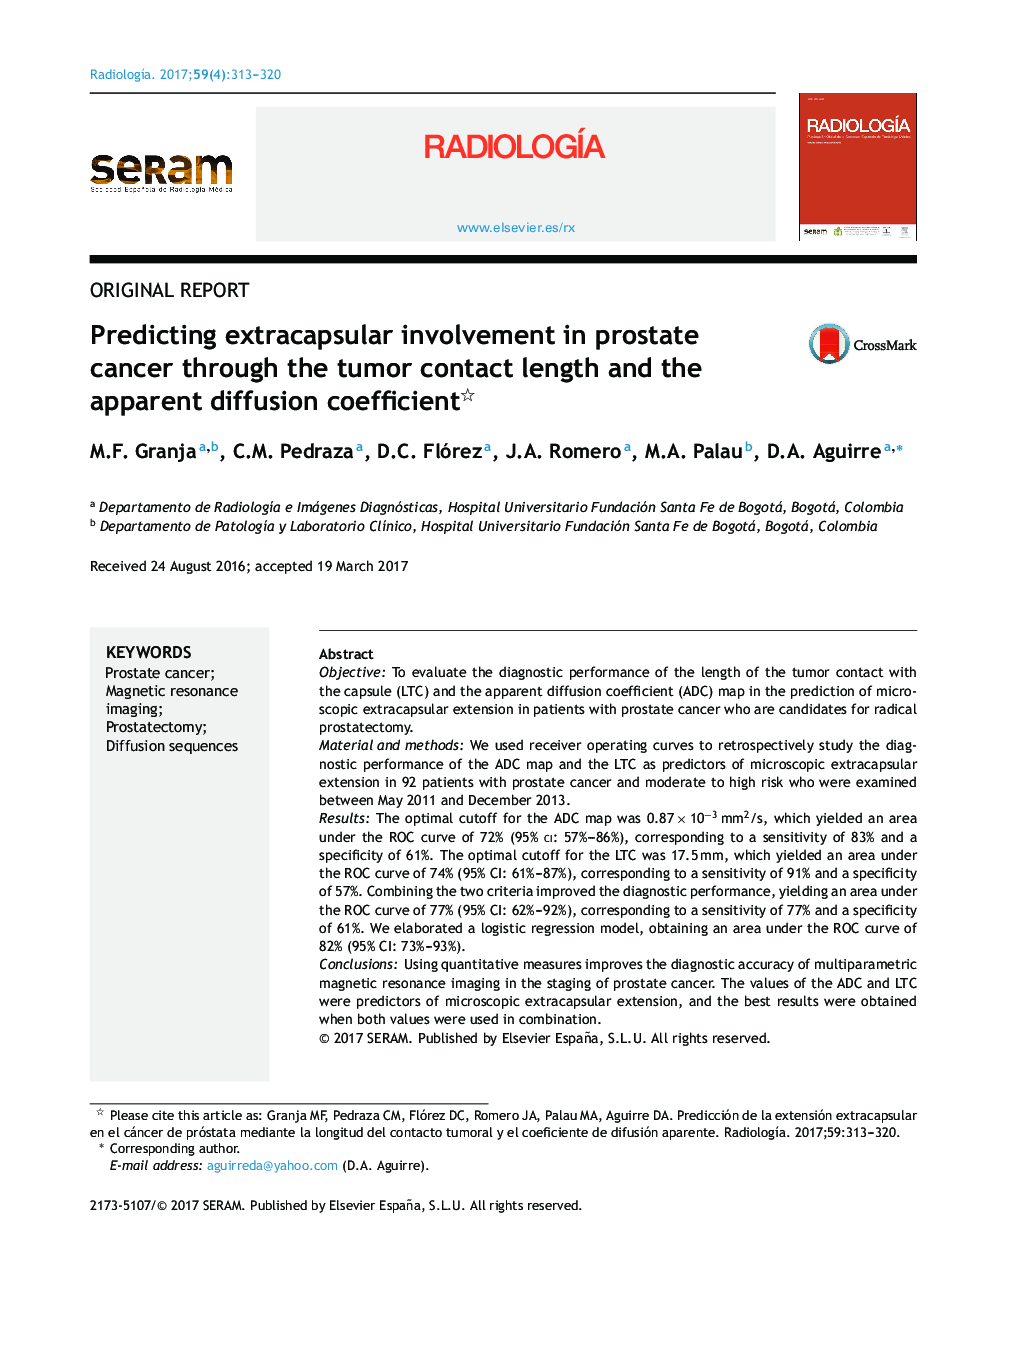 Predicting extracapsular involvement in prostate cancer through the tumor contact length and the apparent diffusion coefficient